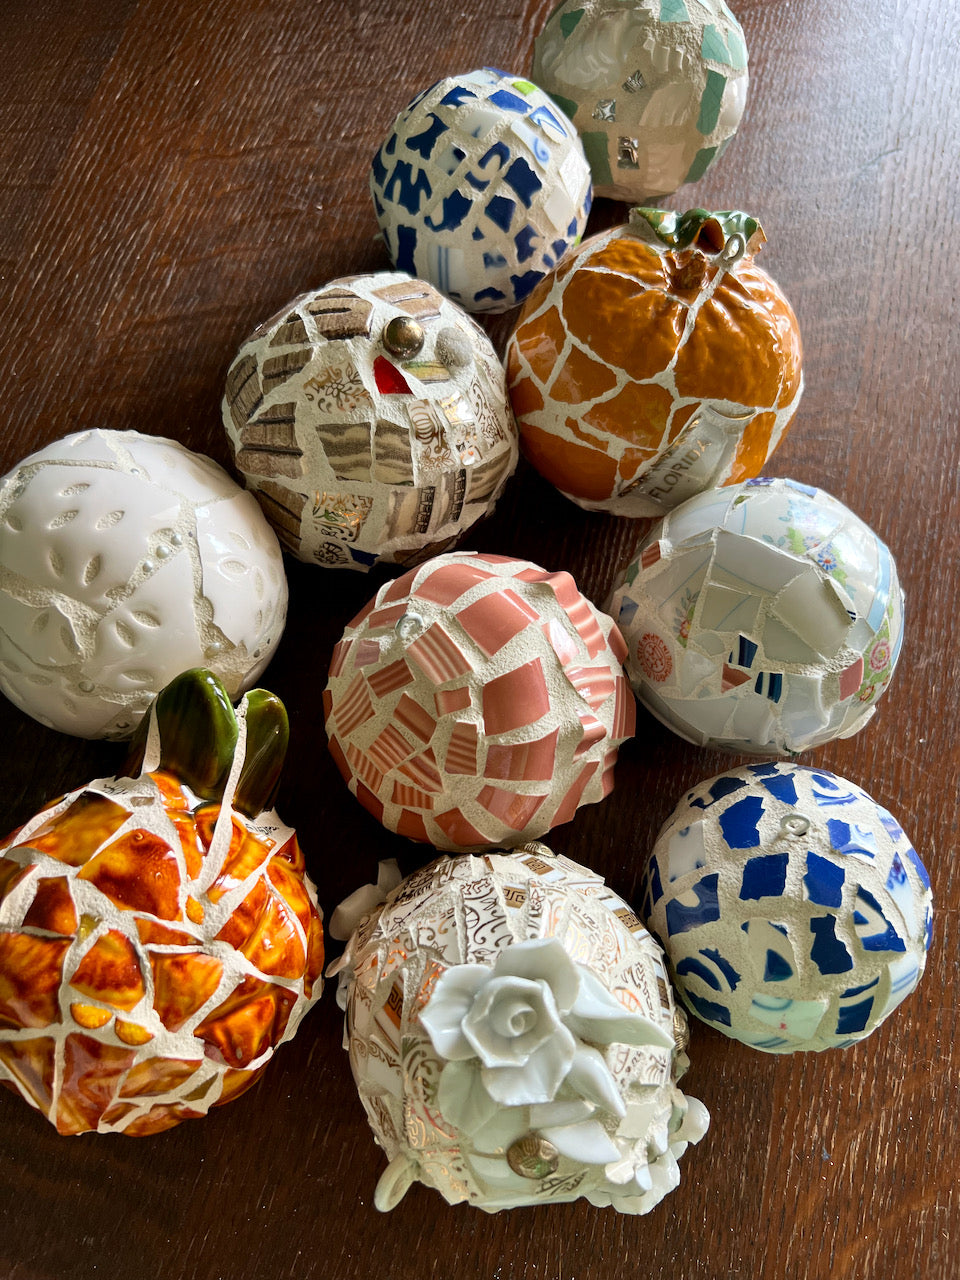 Upcycled Hand Crafted Mosaic Ornament Balls